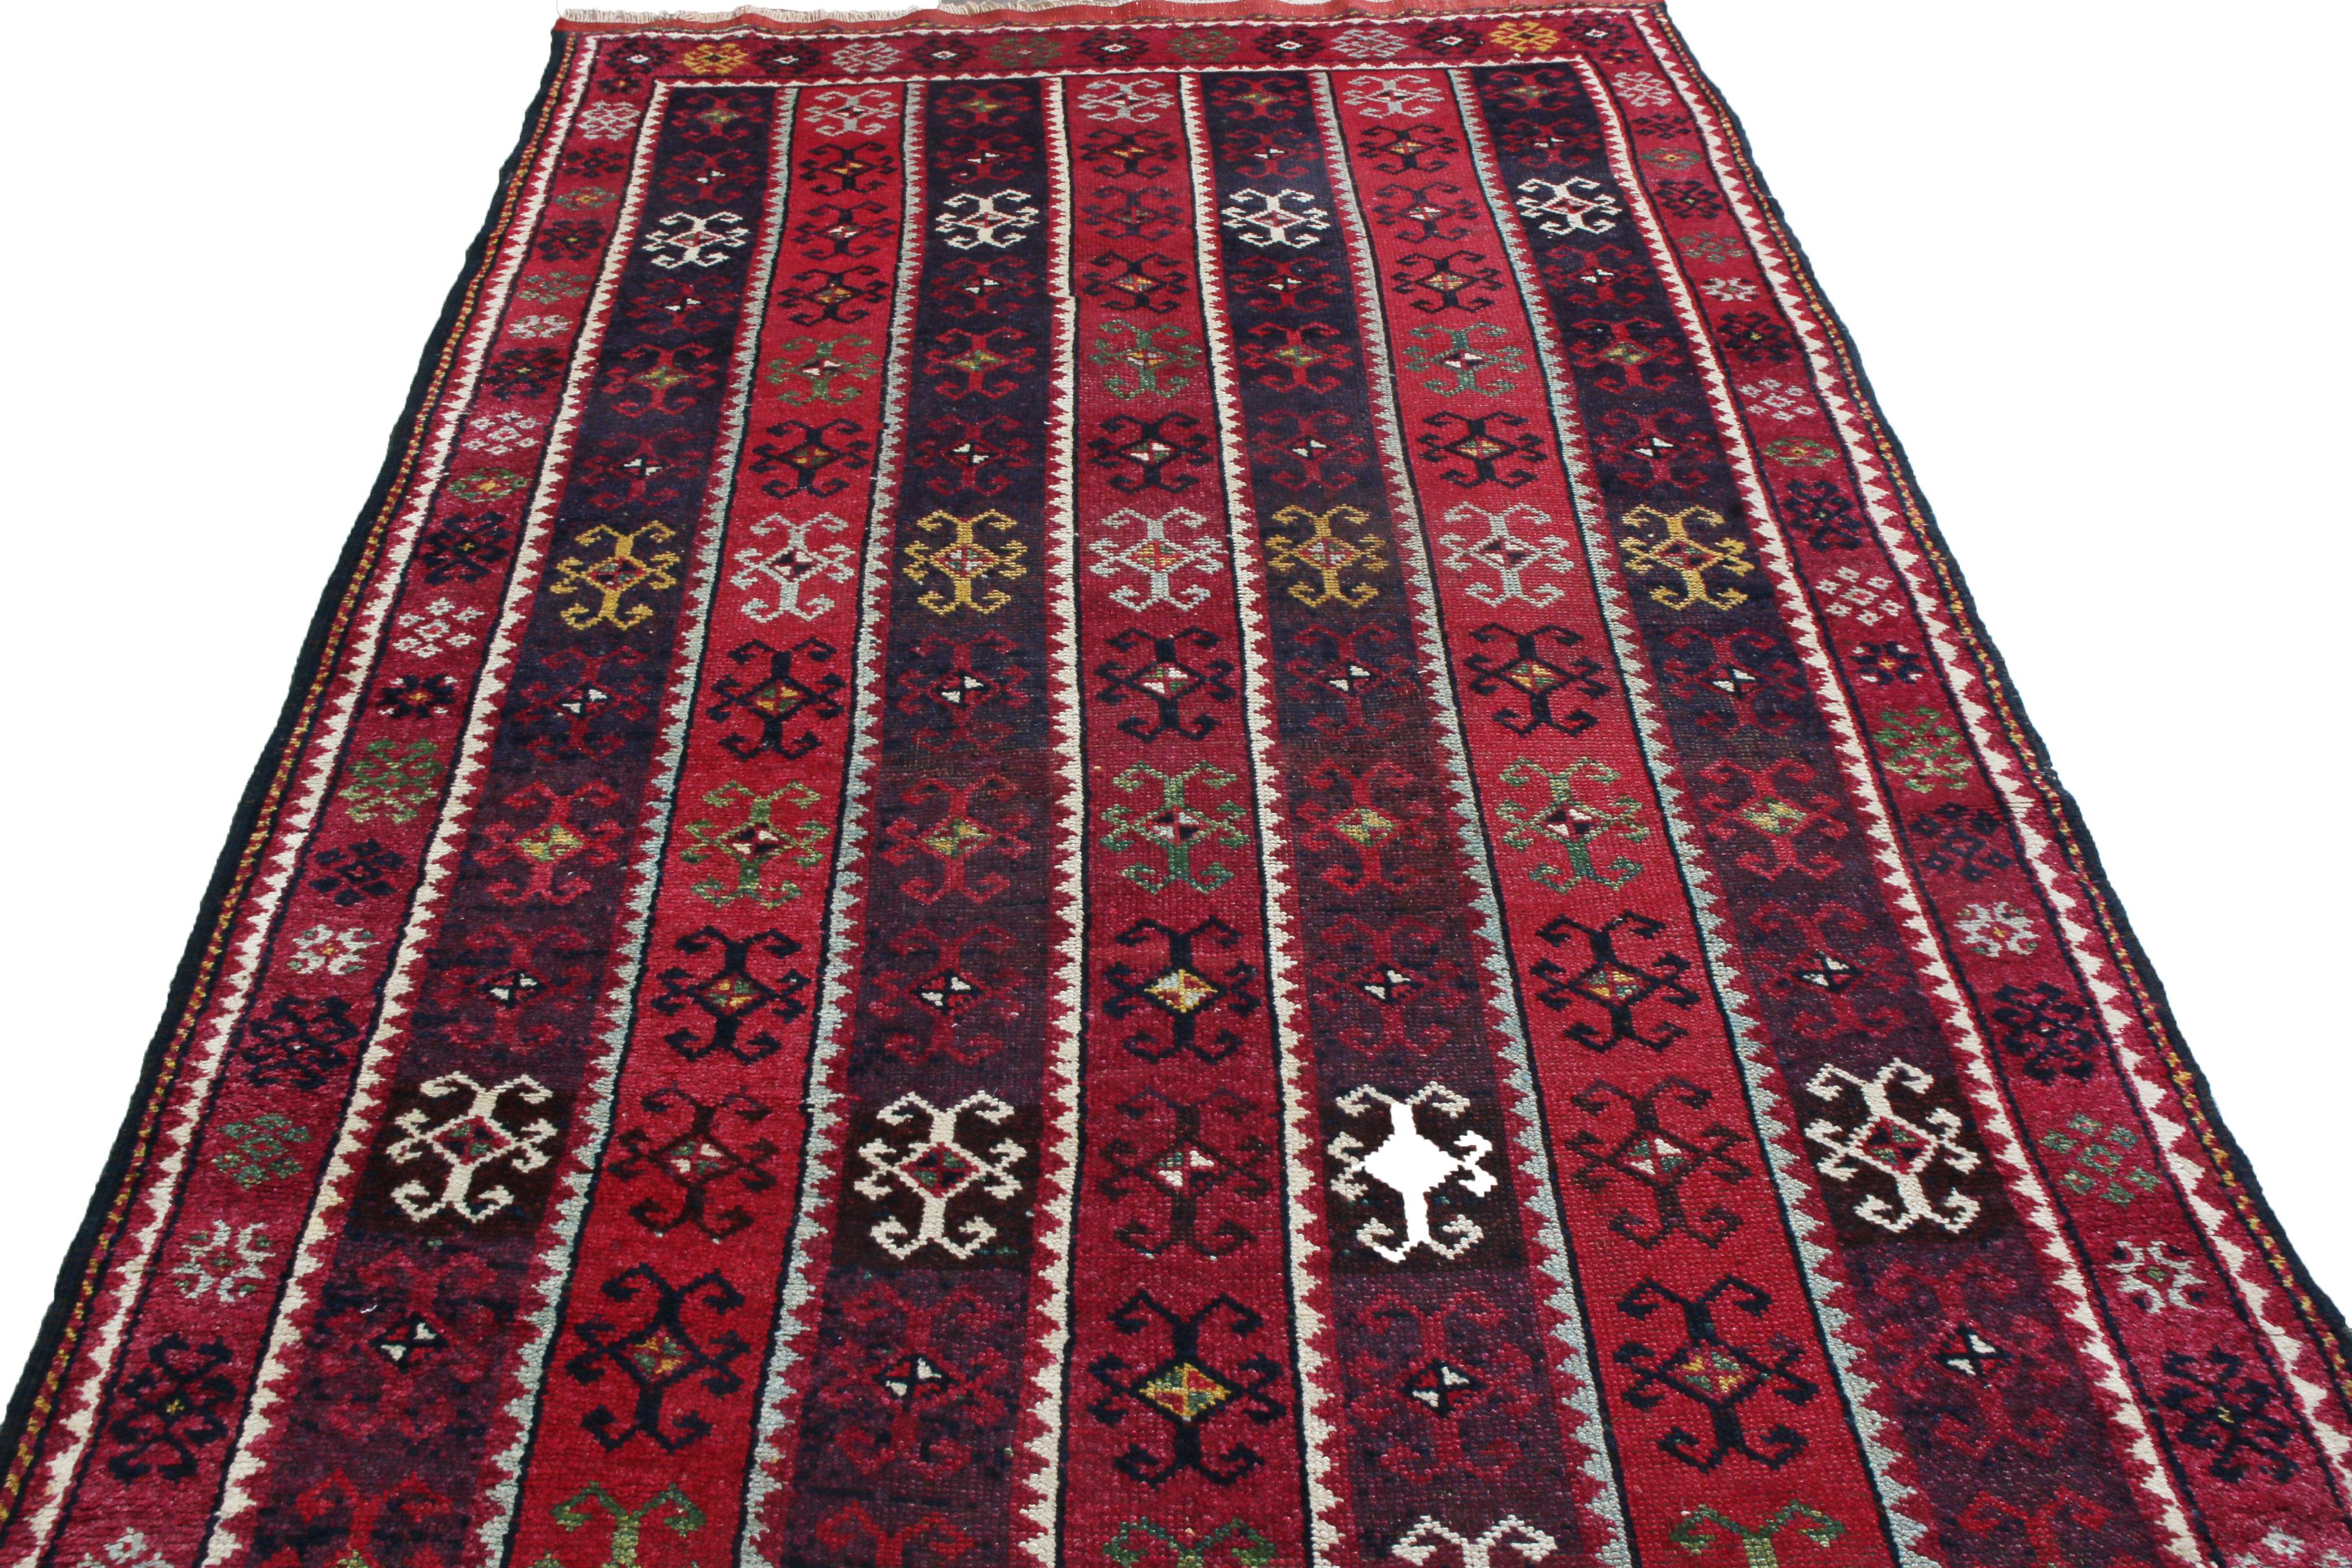 Originating from Turkey in 1890, this hand knotted antique Sivas rug enjoys a unique play on multiple variations of the ram’s Horn motif; a symbol of power, fertility, and protection complemented by the richest multi-tonal burgundy red background.